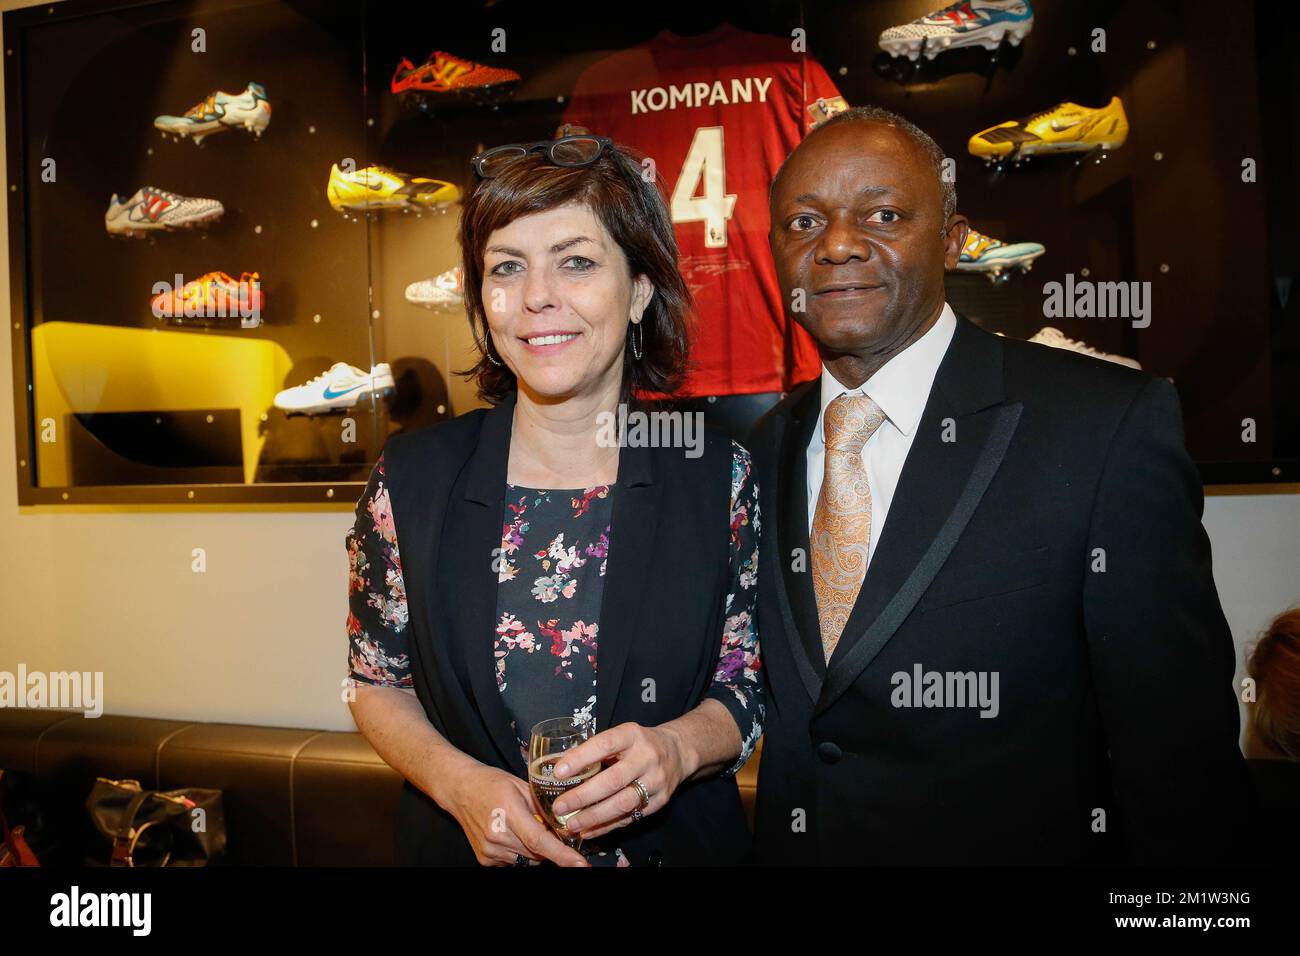 Minister Joelle Milquet and Pierre Kompany pictured during the opening of the 'Good Kompany' sports bar near Grand-Place - Grote Markt in Brussels city center, at the occasion of the opening of this new sports bar owned by international soccer player Vincent Kompany, Friday 18 April 2014.  Stock Photo